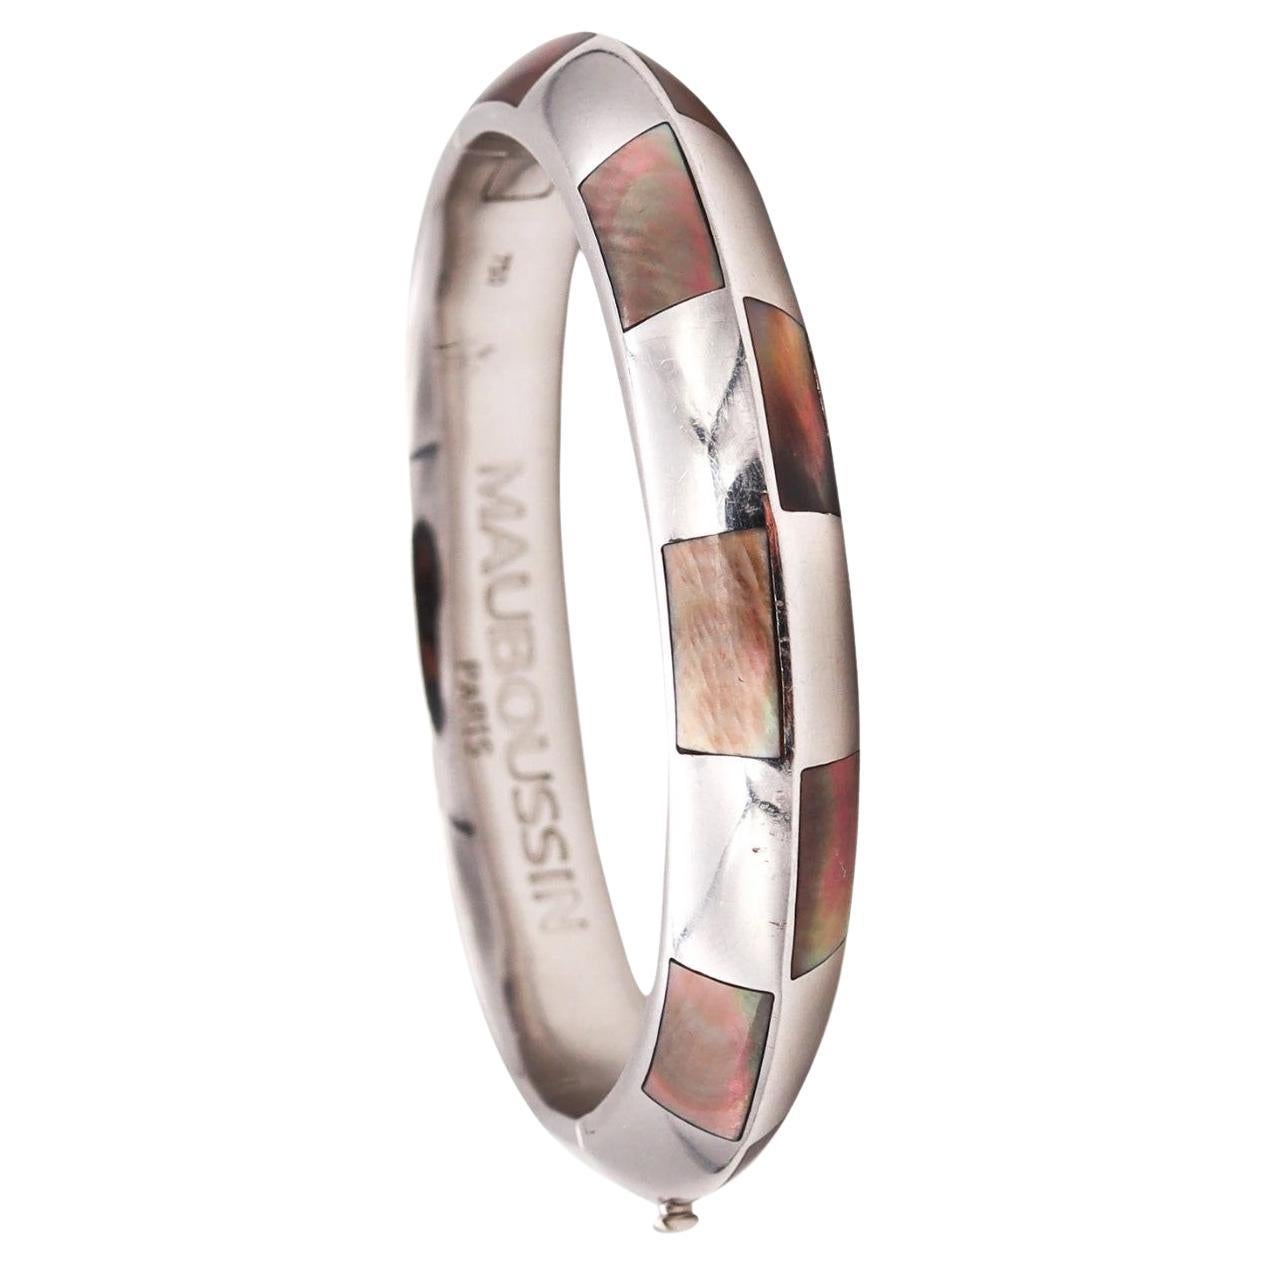 Mauboussin Paris Geometric Bangle Bracelet in 18Kt White Gold with Carved Nacre For Sale